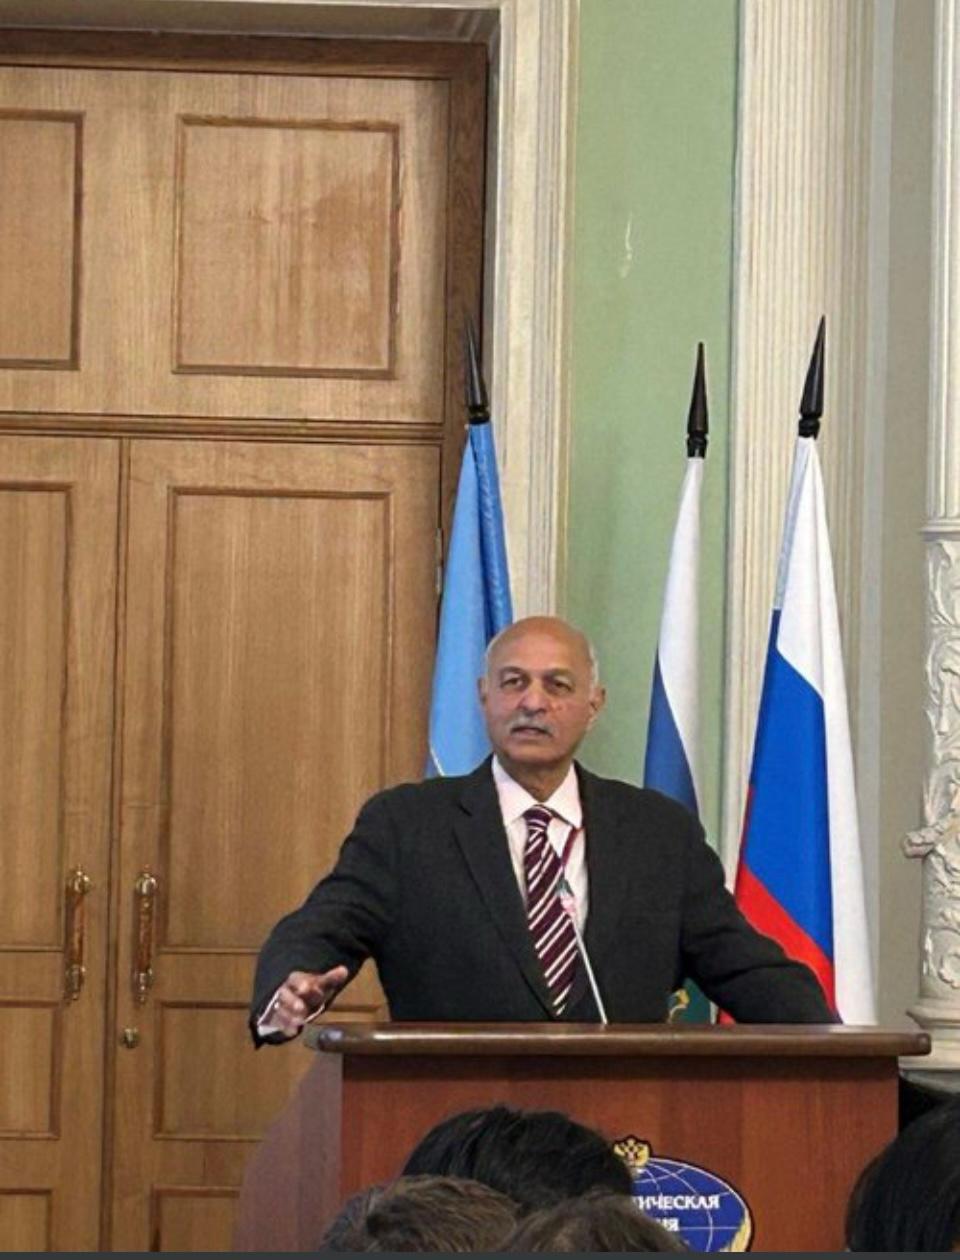 Mushahid welcomes ‘Russian goodwill for Pakistan.